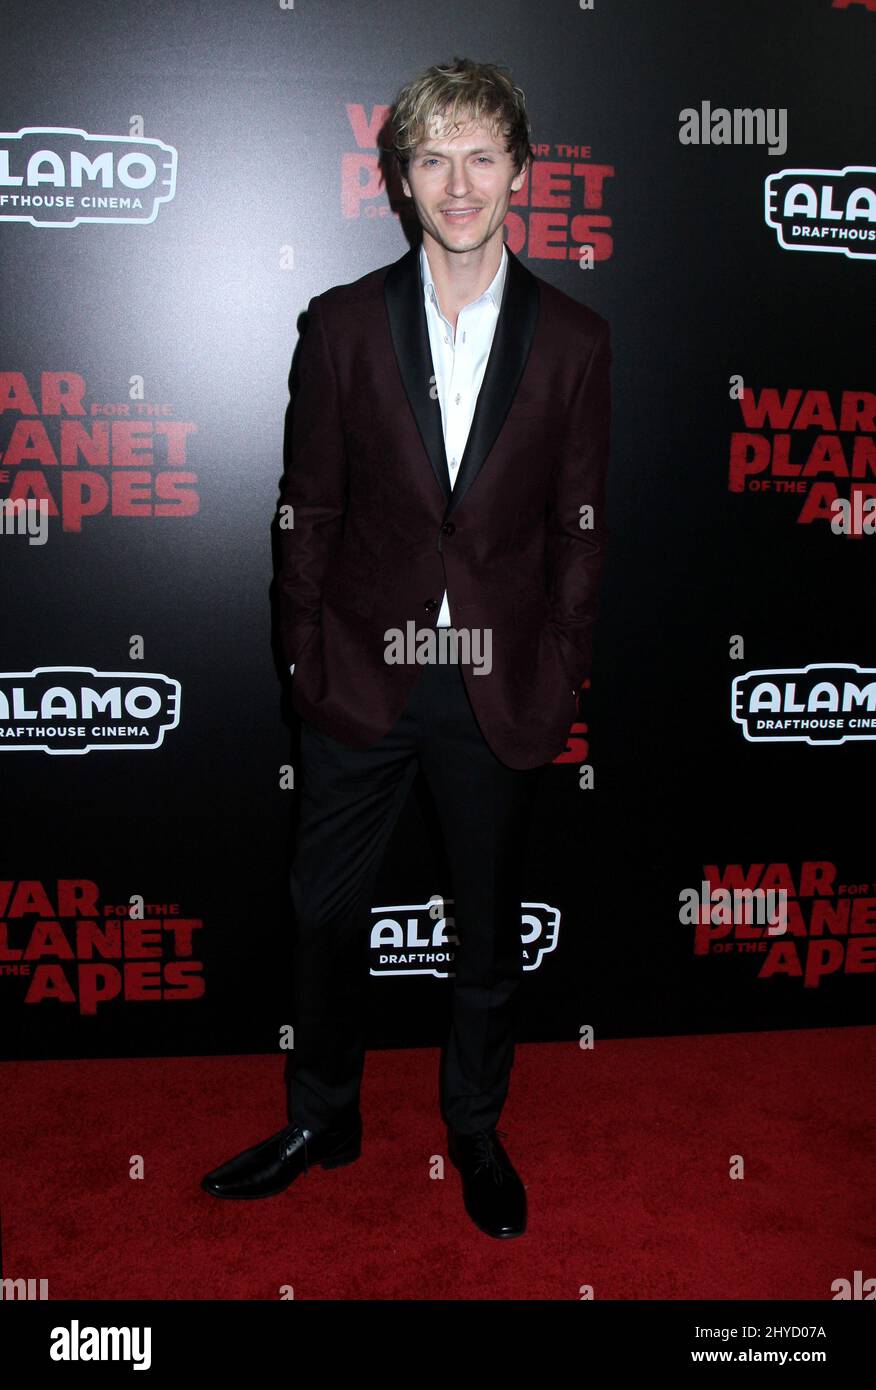 Chad Rook arriving for the 'War For The Planet Of The Apes' Premiere held at the SVA Theater, New York on July 10, 2017 Stock Photo